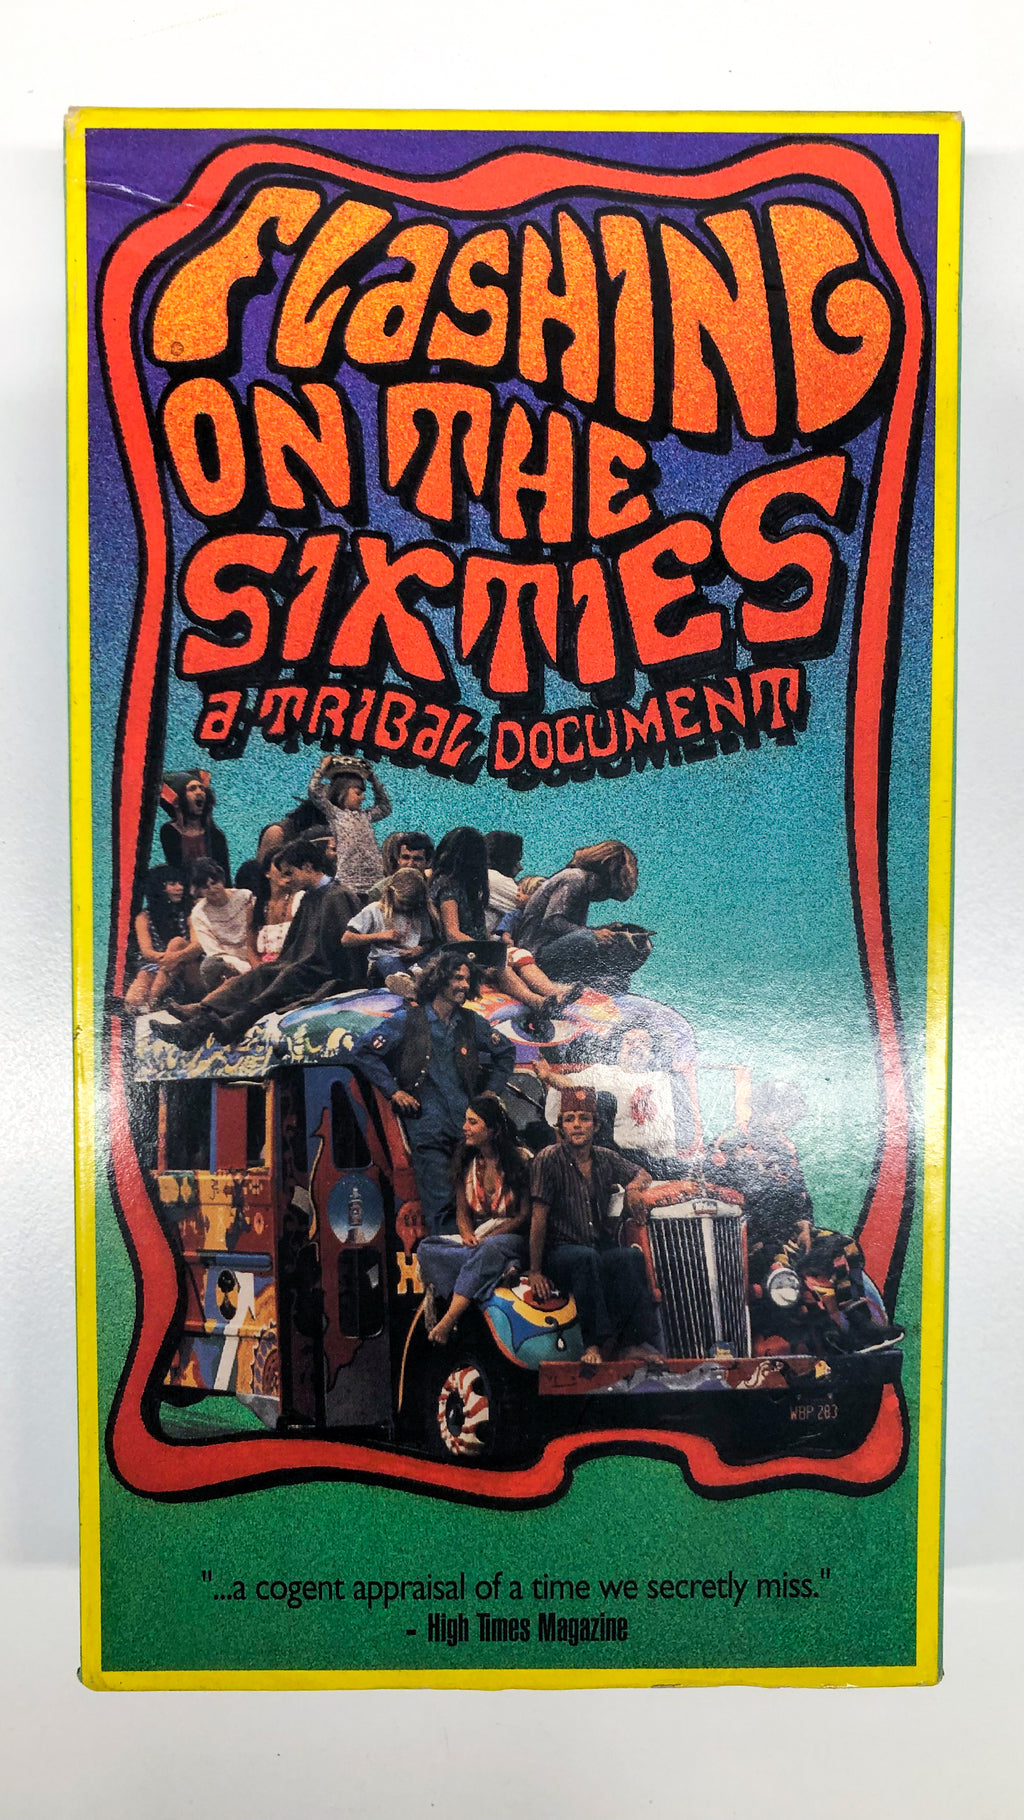 Flashing on the Sixties: A Tribal Document